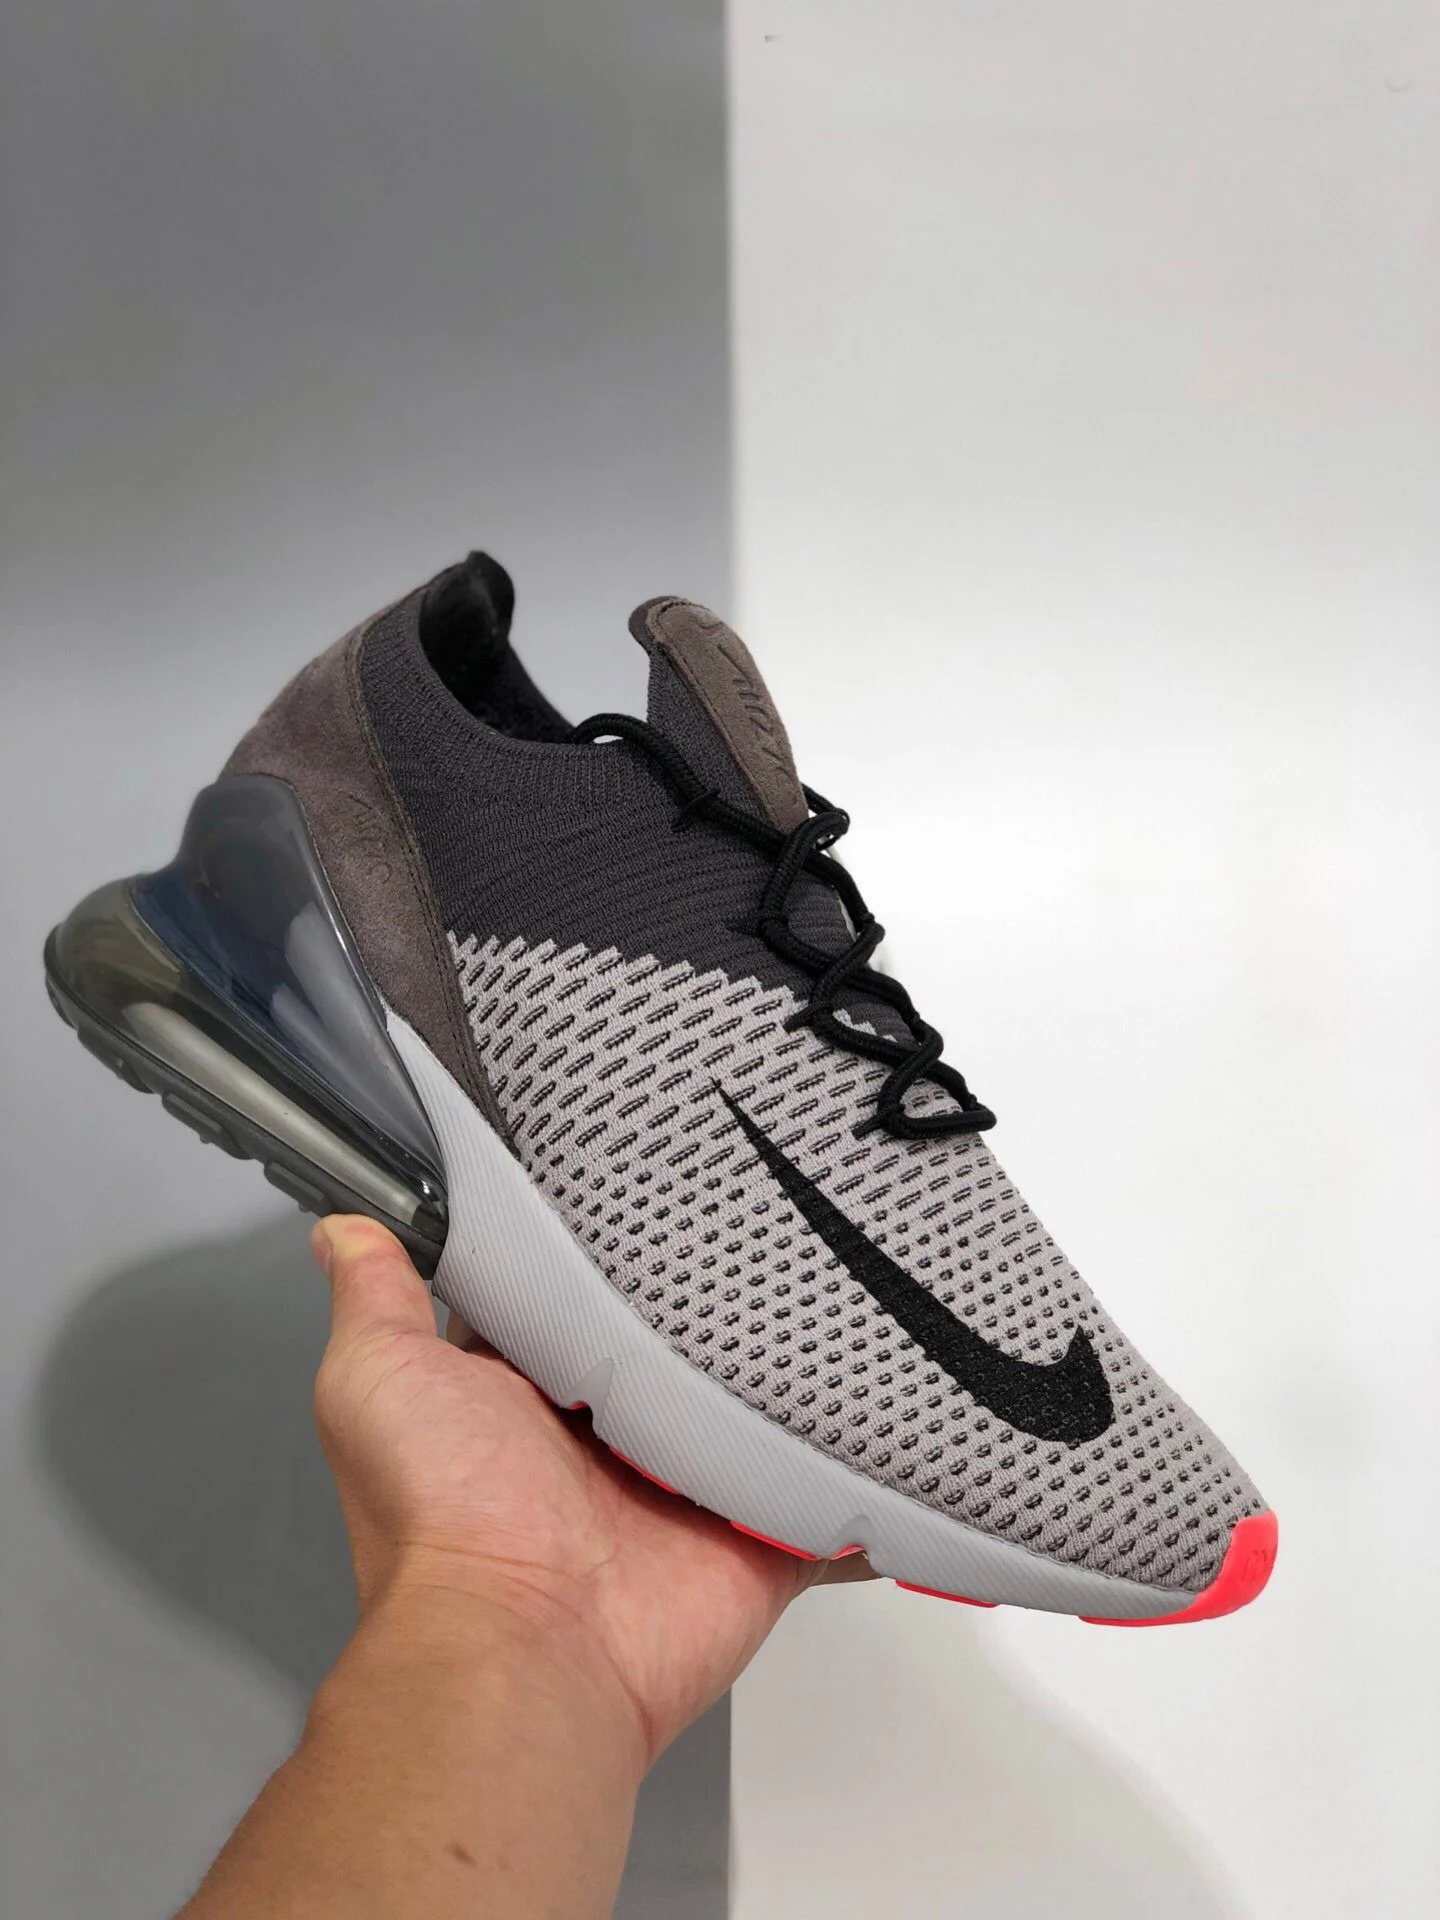 Nike Air Max 270 Flyknit Atmosphere Grey AO1023-004 For Sale